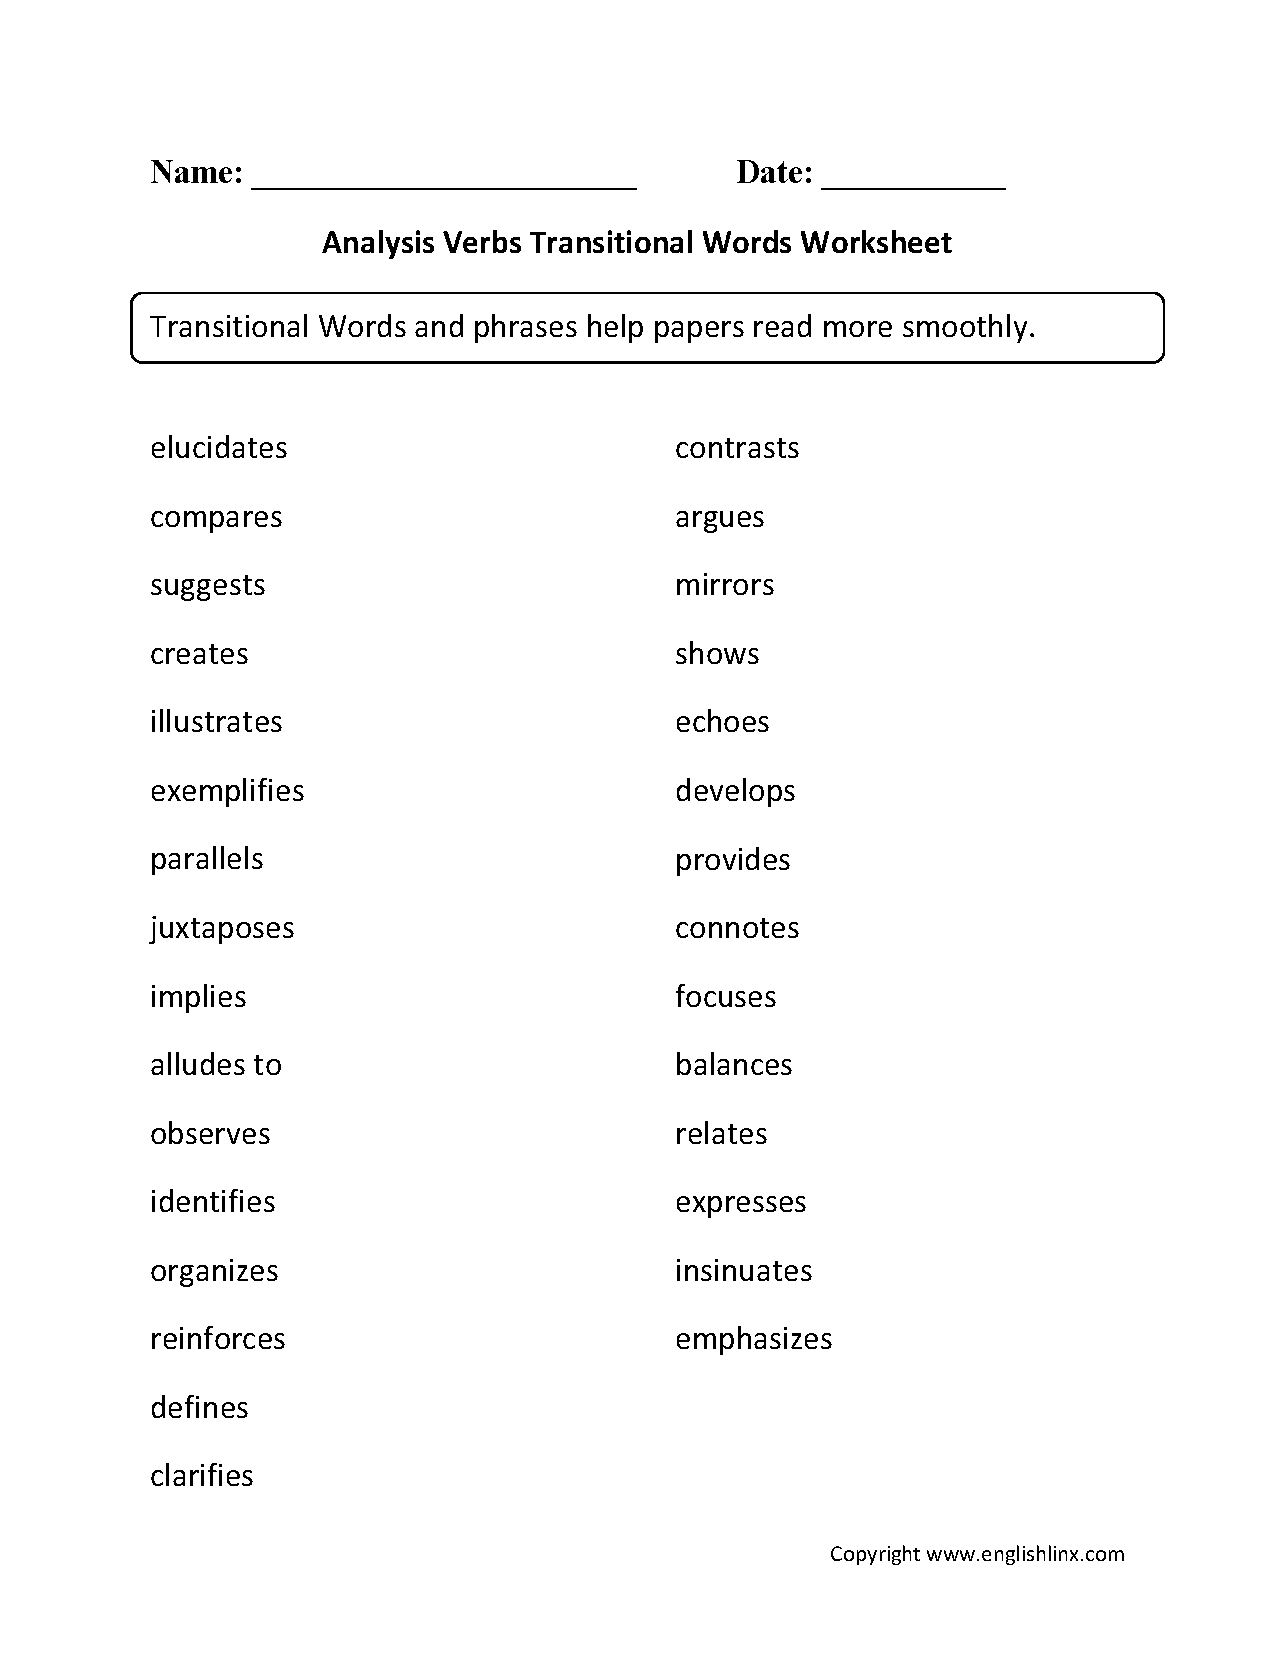 Analysis Verbs Transitional Words Worksheets